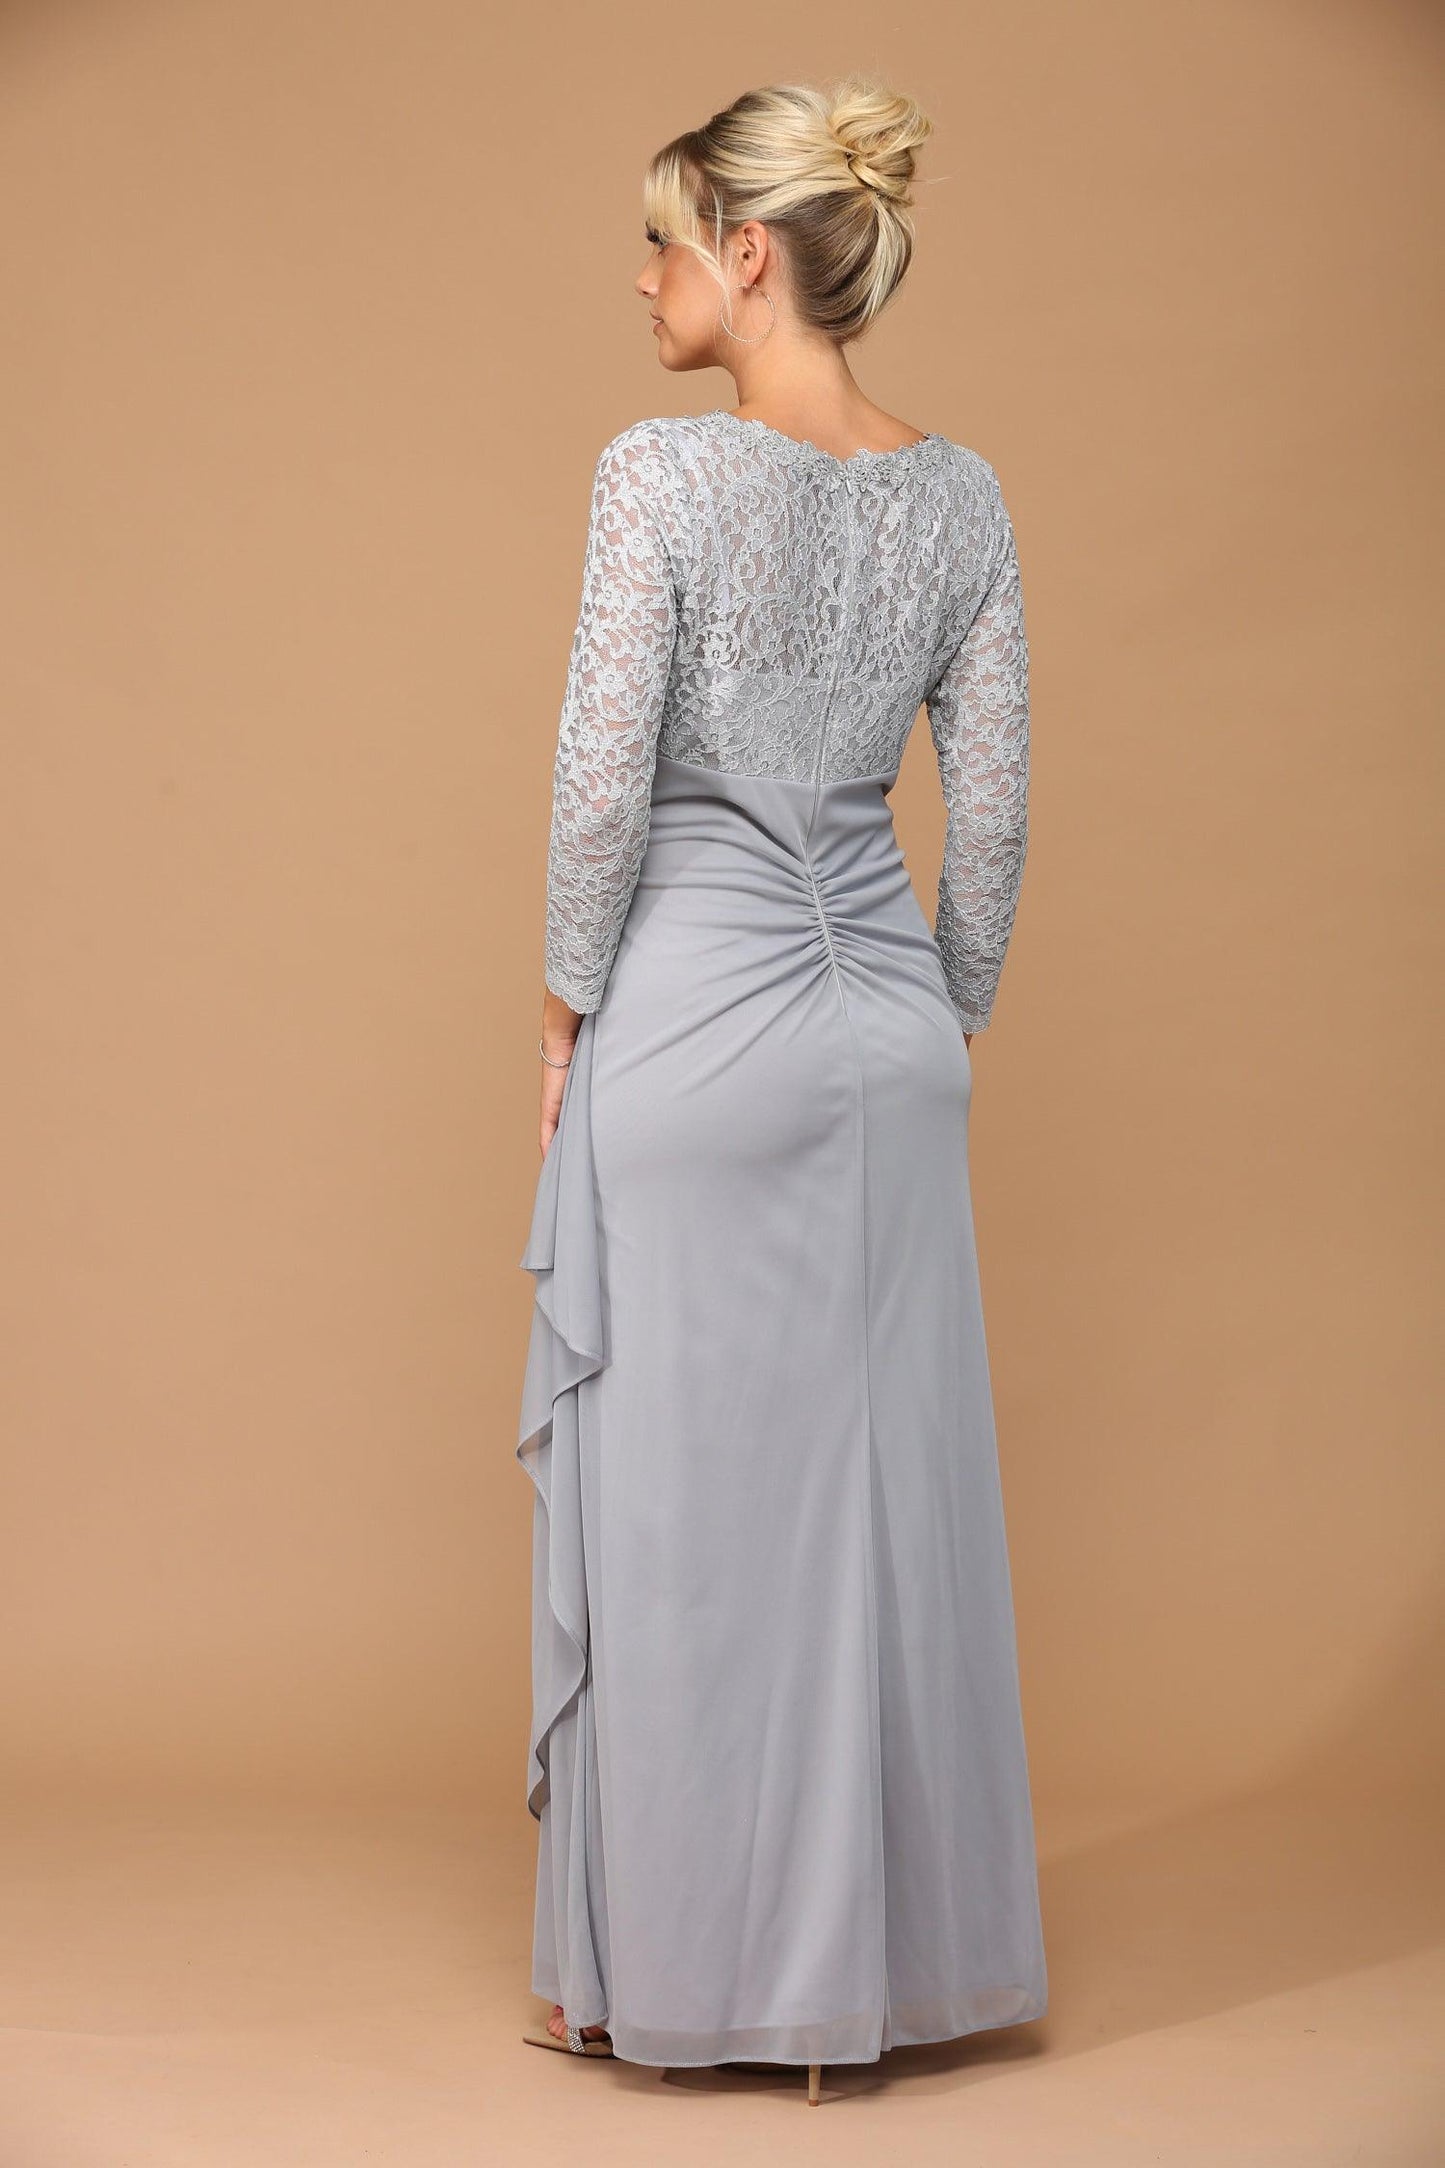 Long Sleeve Formal Mother of the Bride Evening Gown